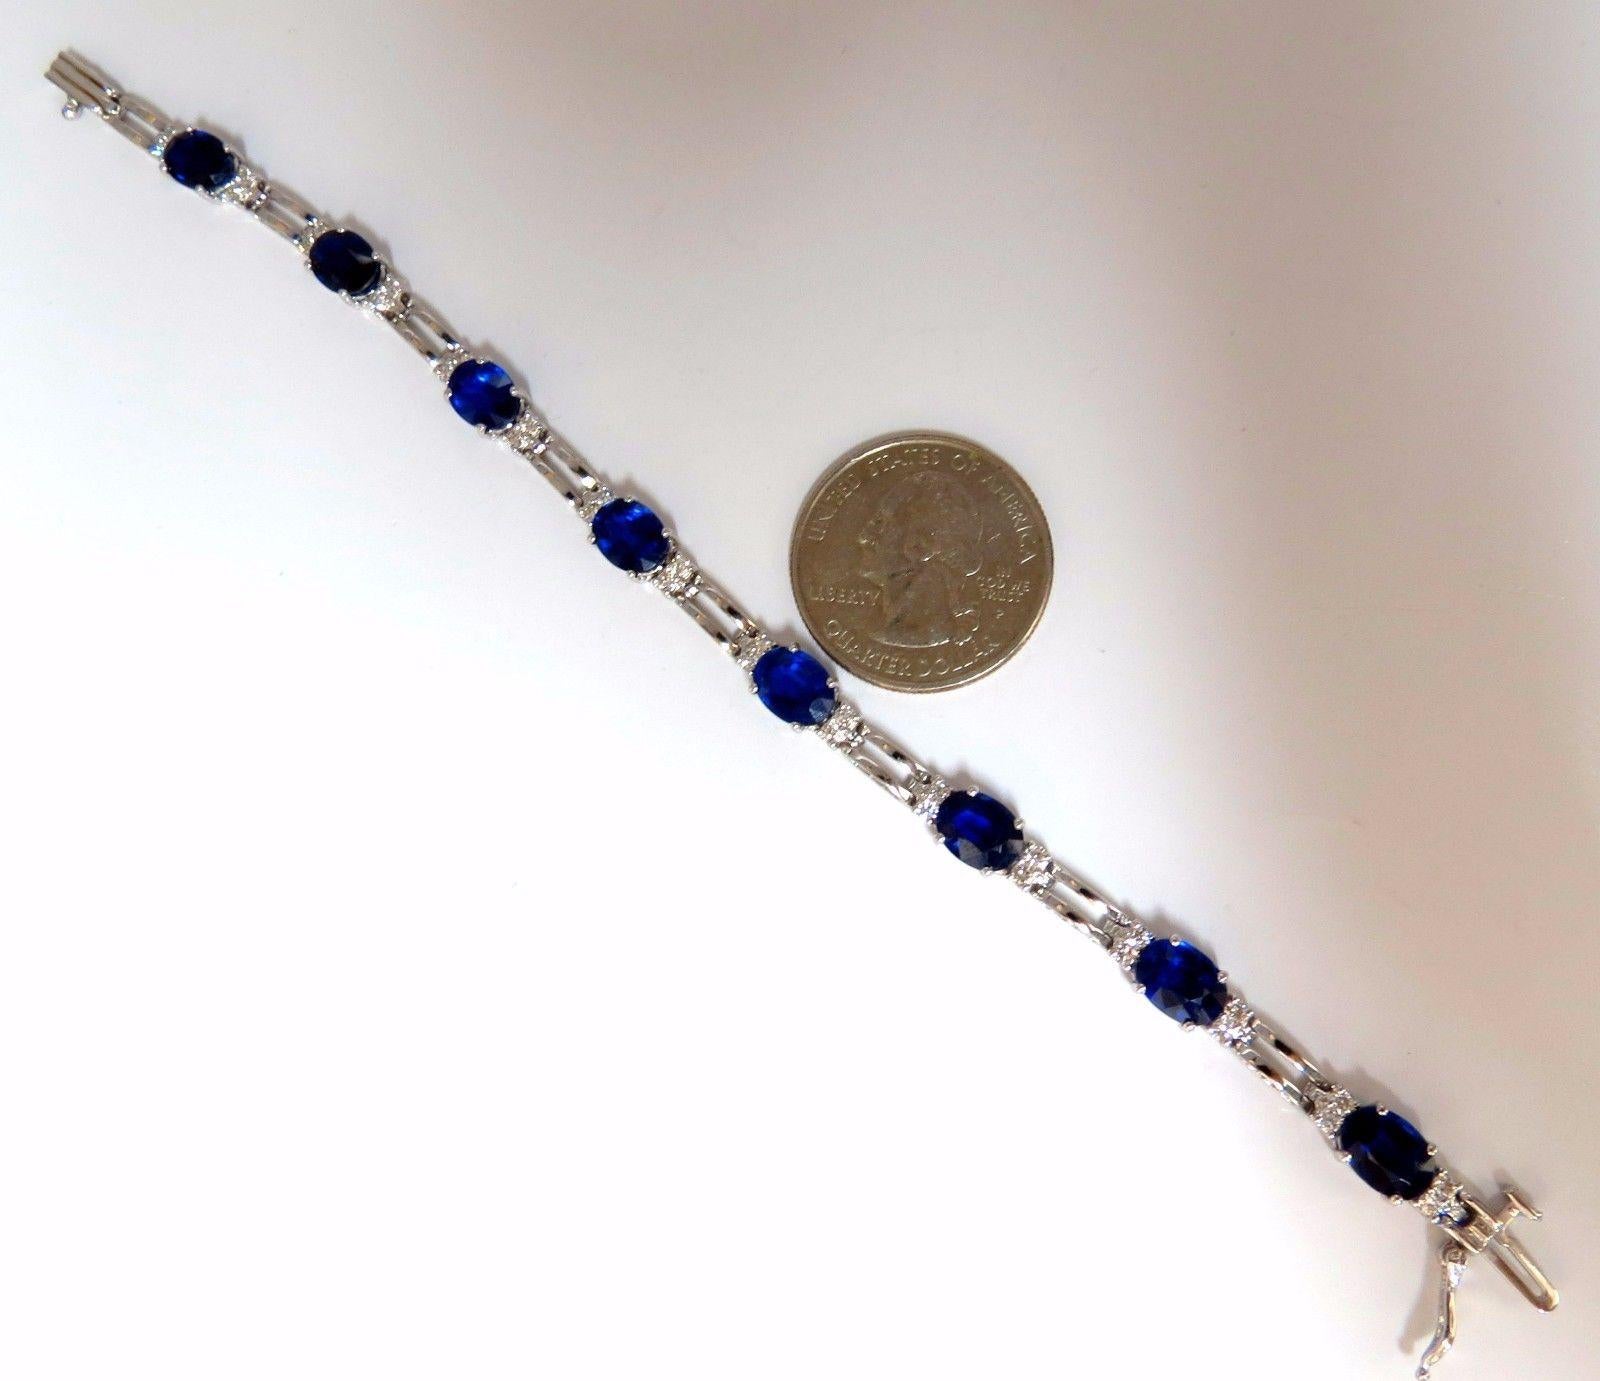 Kyanite & Diamonds Tennis.

12.48ct. Natural Kyanites bracelet.

Oval, full cuts 

Clean clarity

Transparent & Vivid Kashmere Blues.

 average: 8 X 6mm

8 count.



.88ct Diamonds

Rounds & full cuts

Vs-2 clarity.

G-colors.

14kt. white gold